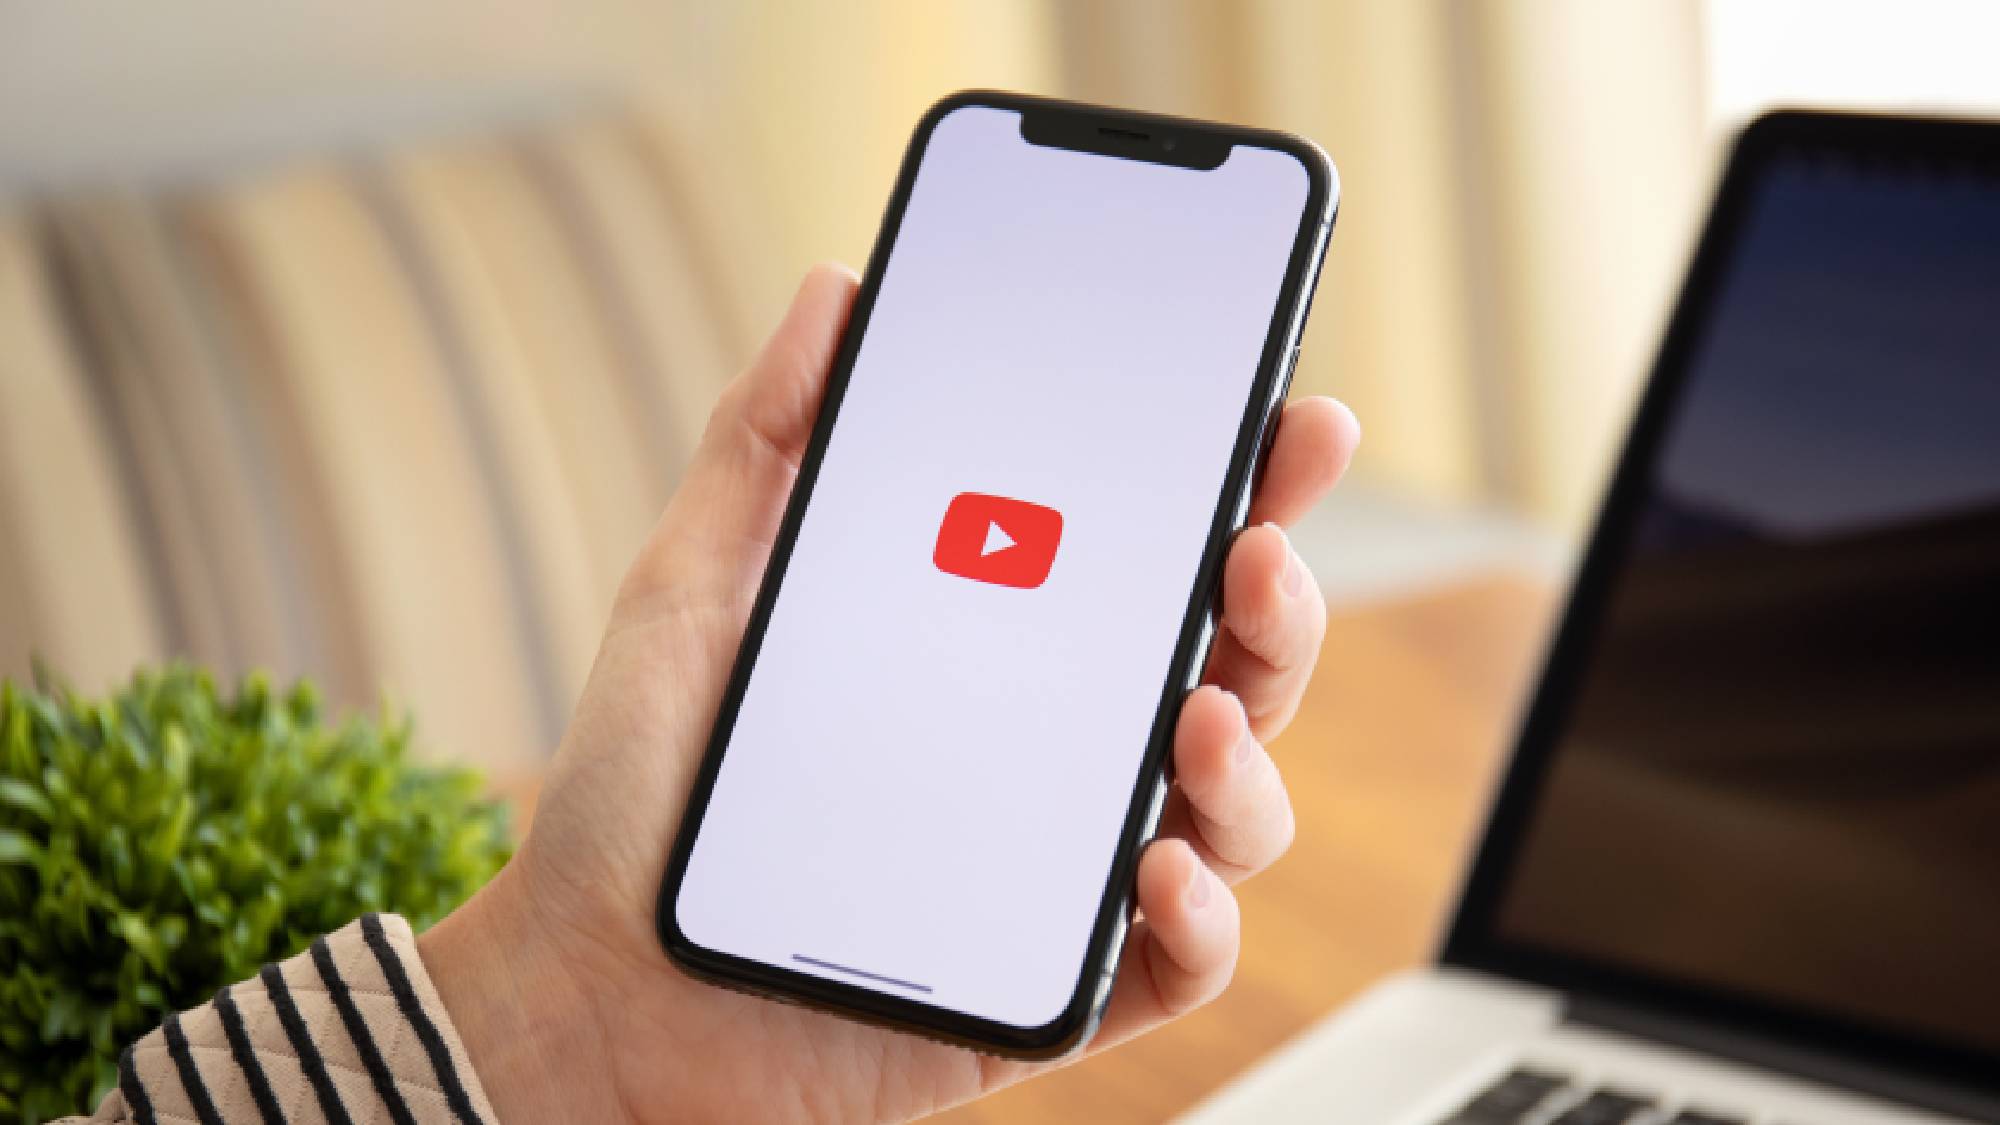 How Can I Download Music From YouTube To My IPhone